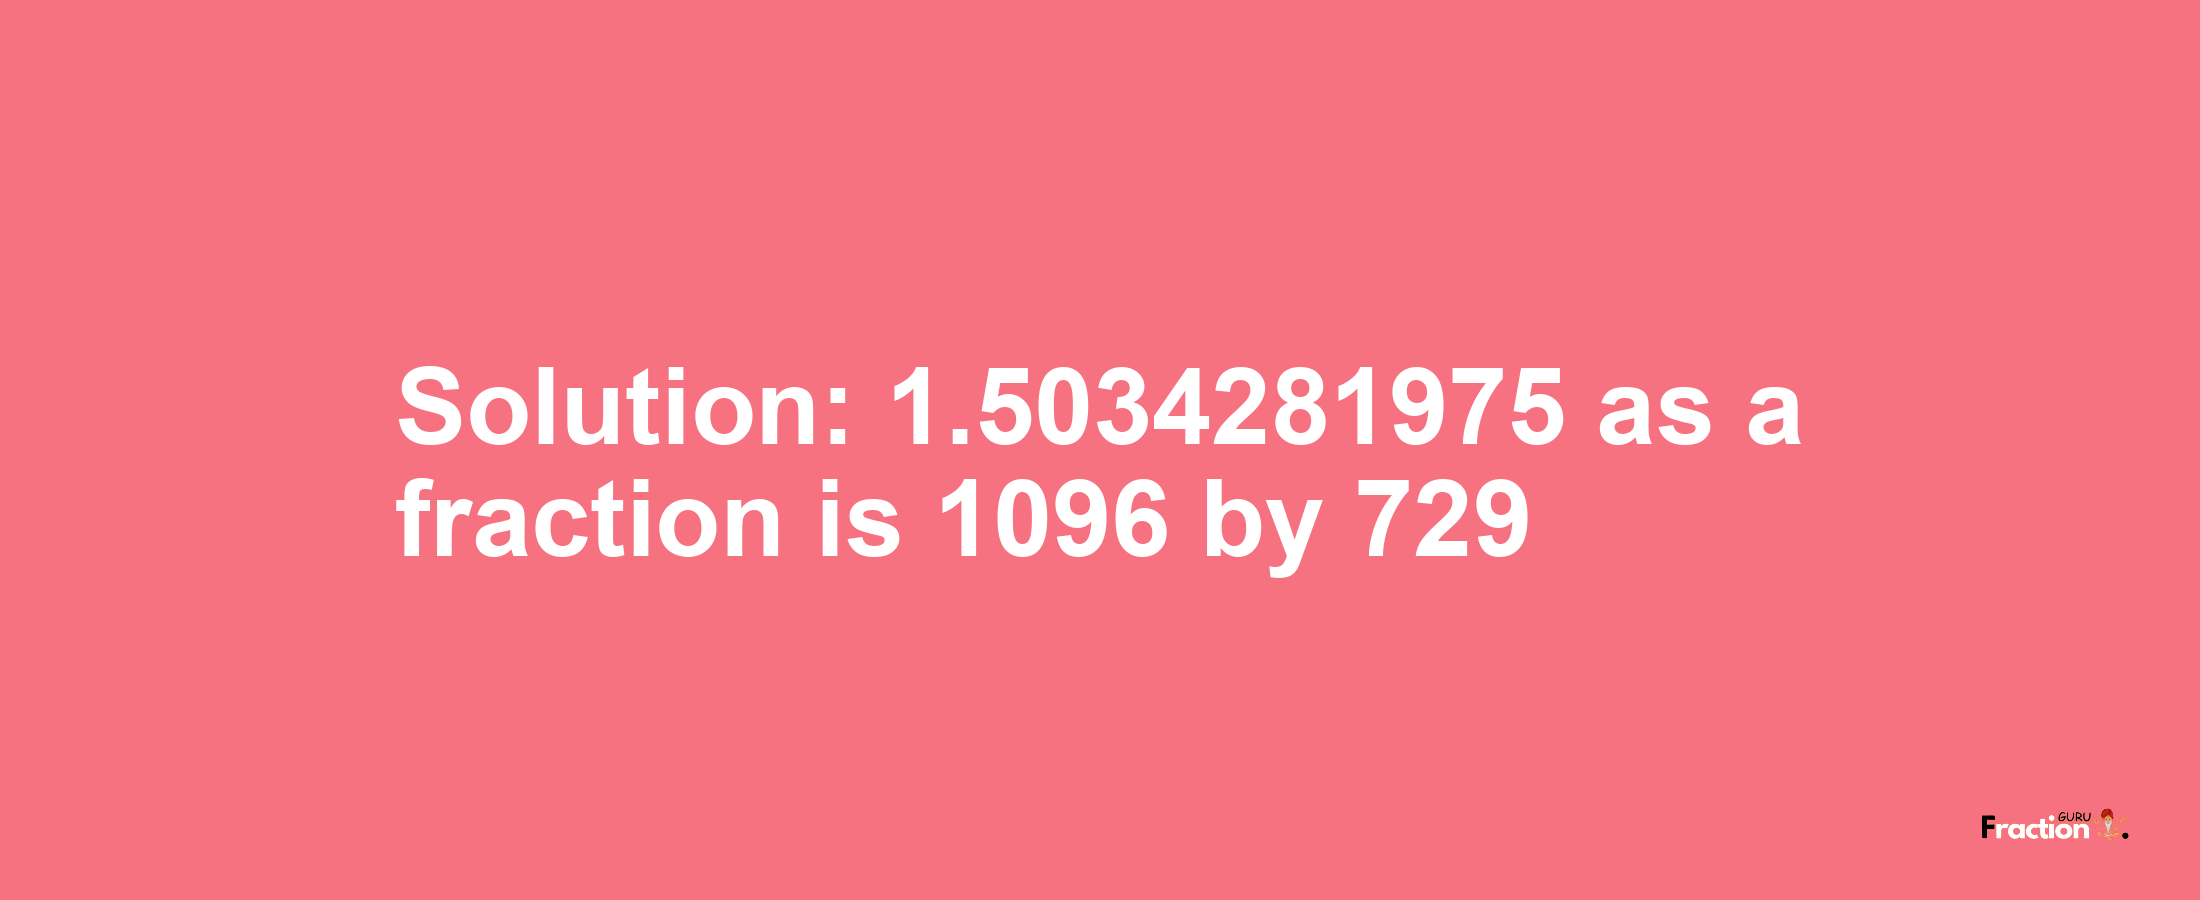 Solution:1.5034281975 as a fraction is 1096/729